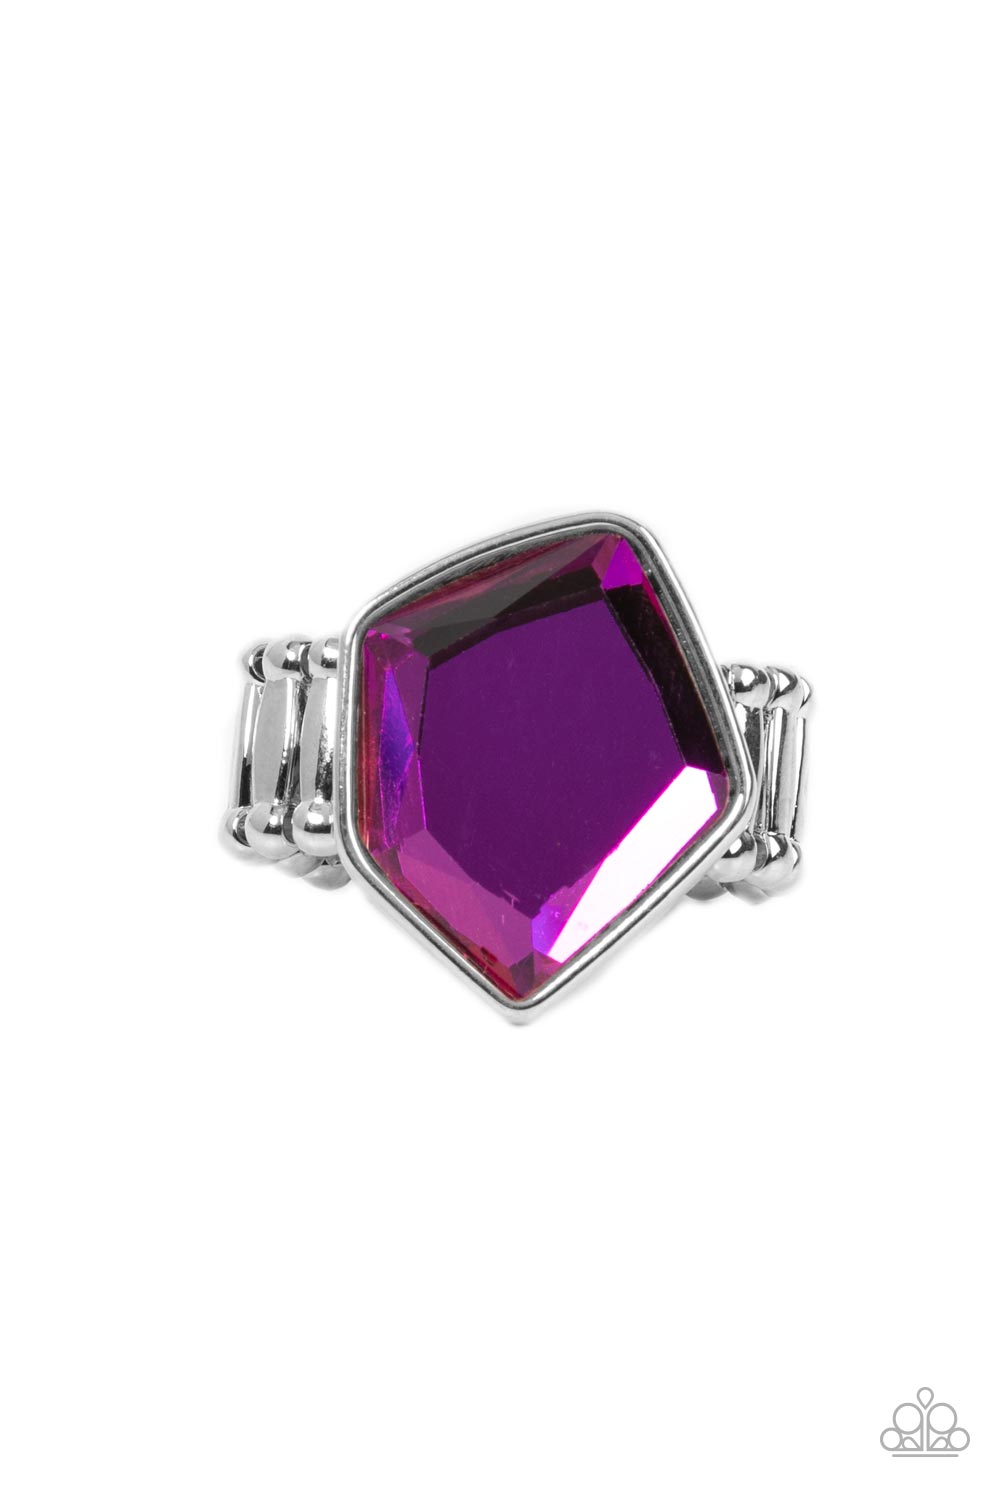 Abstract Escapade Purple Ring - Paparazzi Accessories- lightbox - CarasShop.com - $5 Jewelry by Cara Jewels